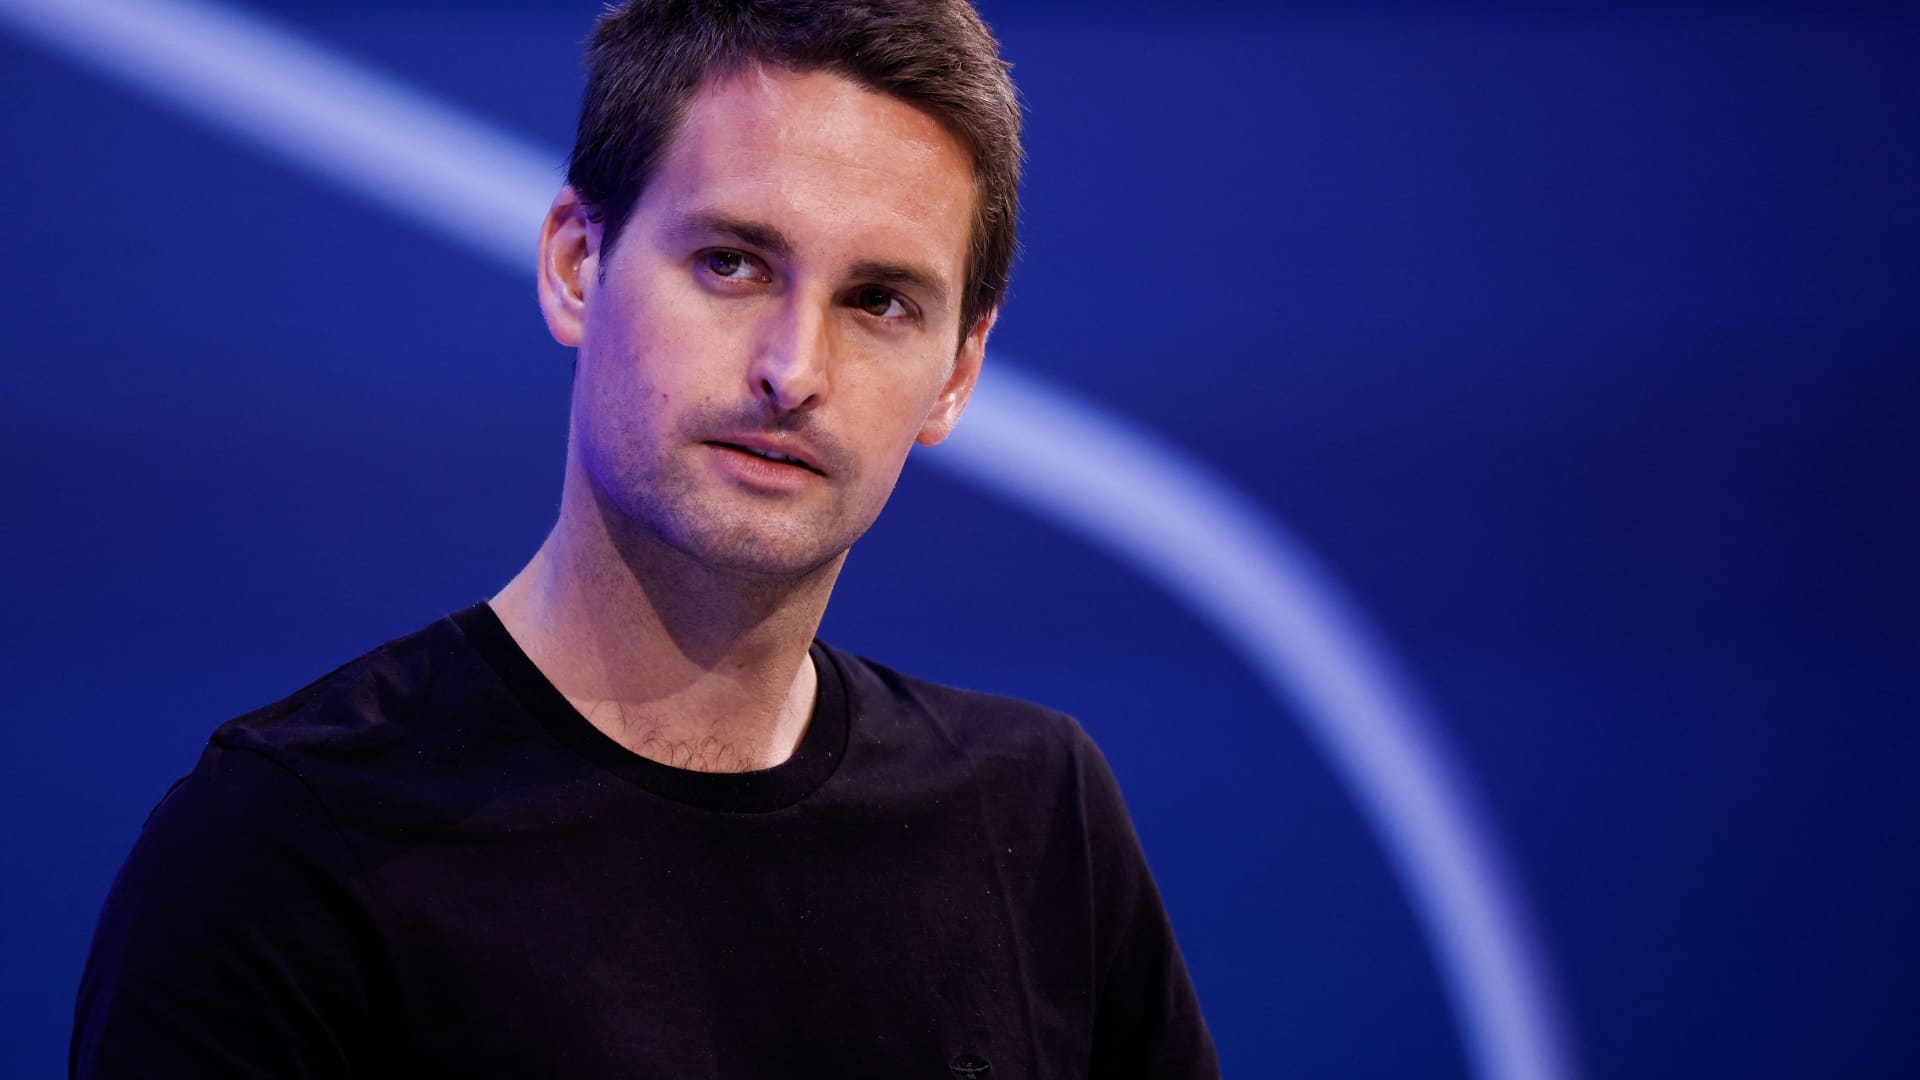 Co-founder and CEO of Snap Inc. Evan Spiegel attends the Viva Technology conference dedicated to innovation and startups, at the Porte de Versailles exhibition center in Paris, France June 17, 2022.